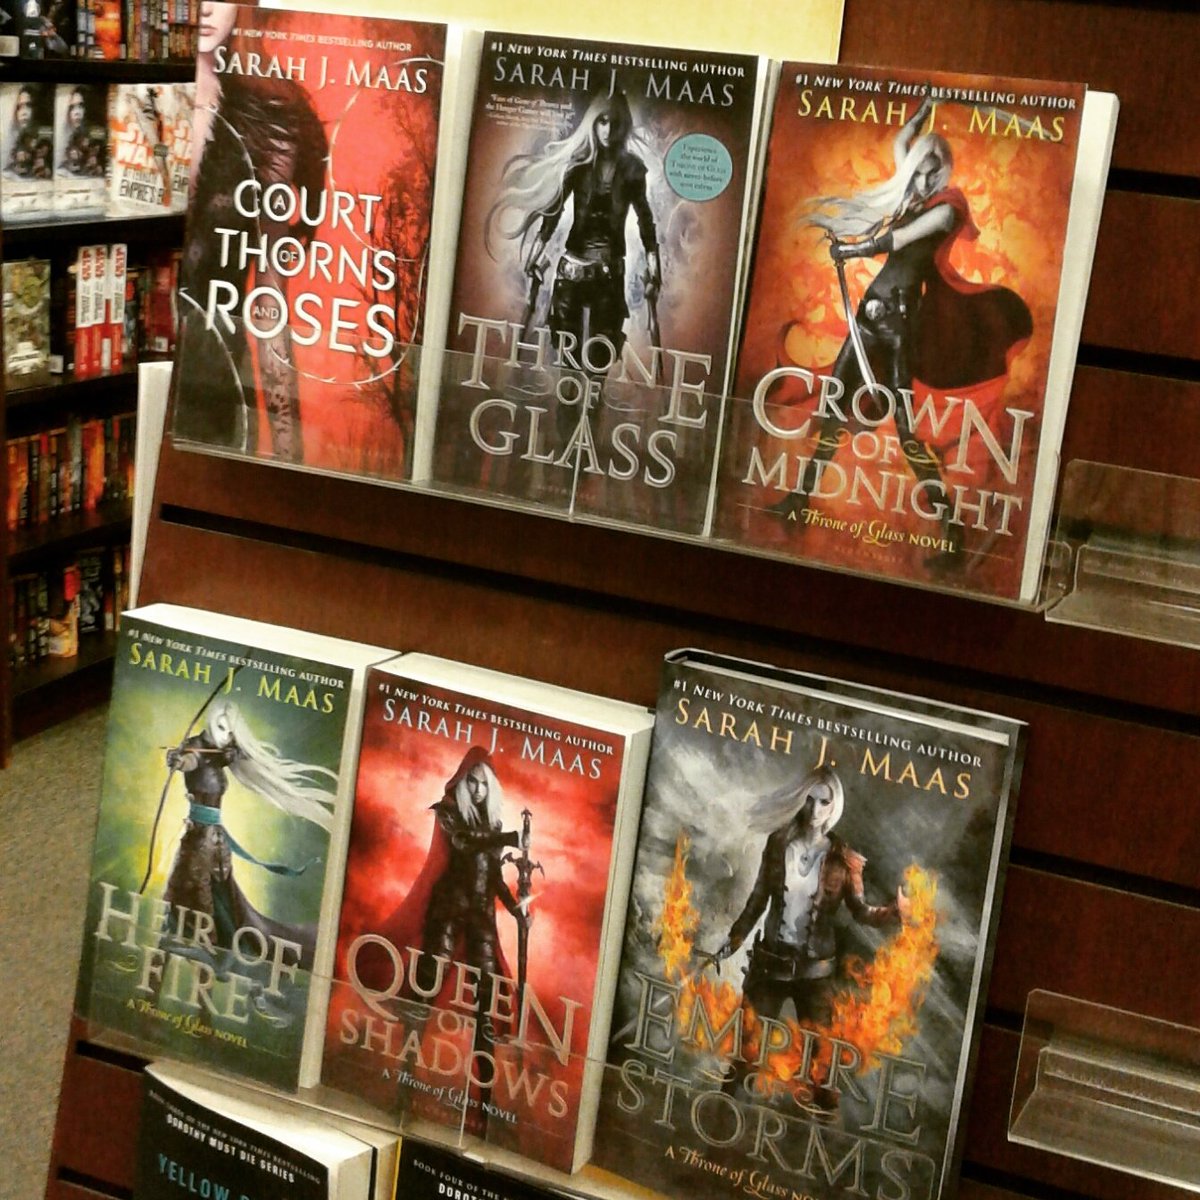 Celebrate #teenliteratureday with us and the awesome Sarah J Maas series! #recomendations